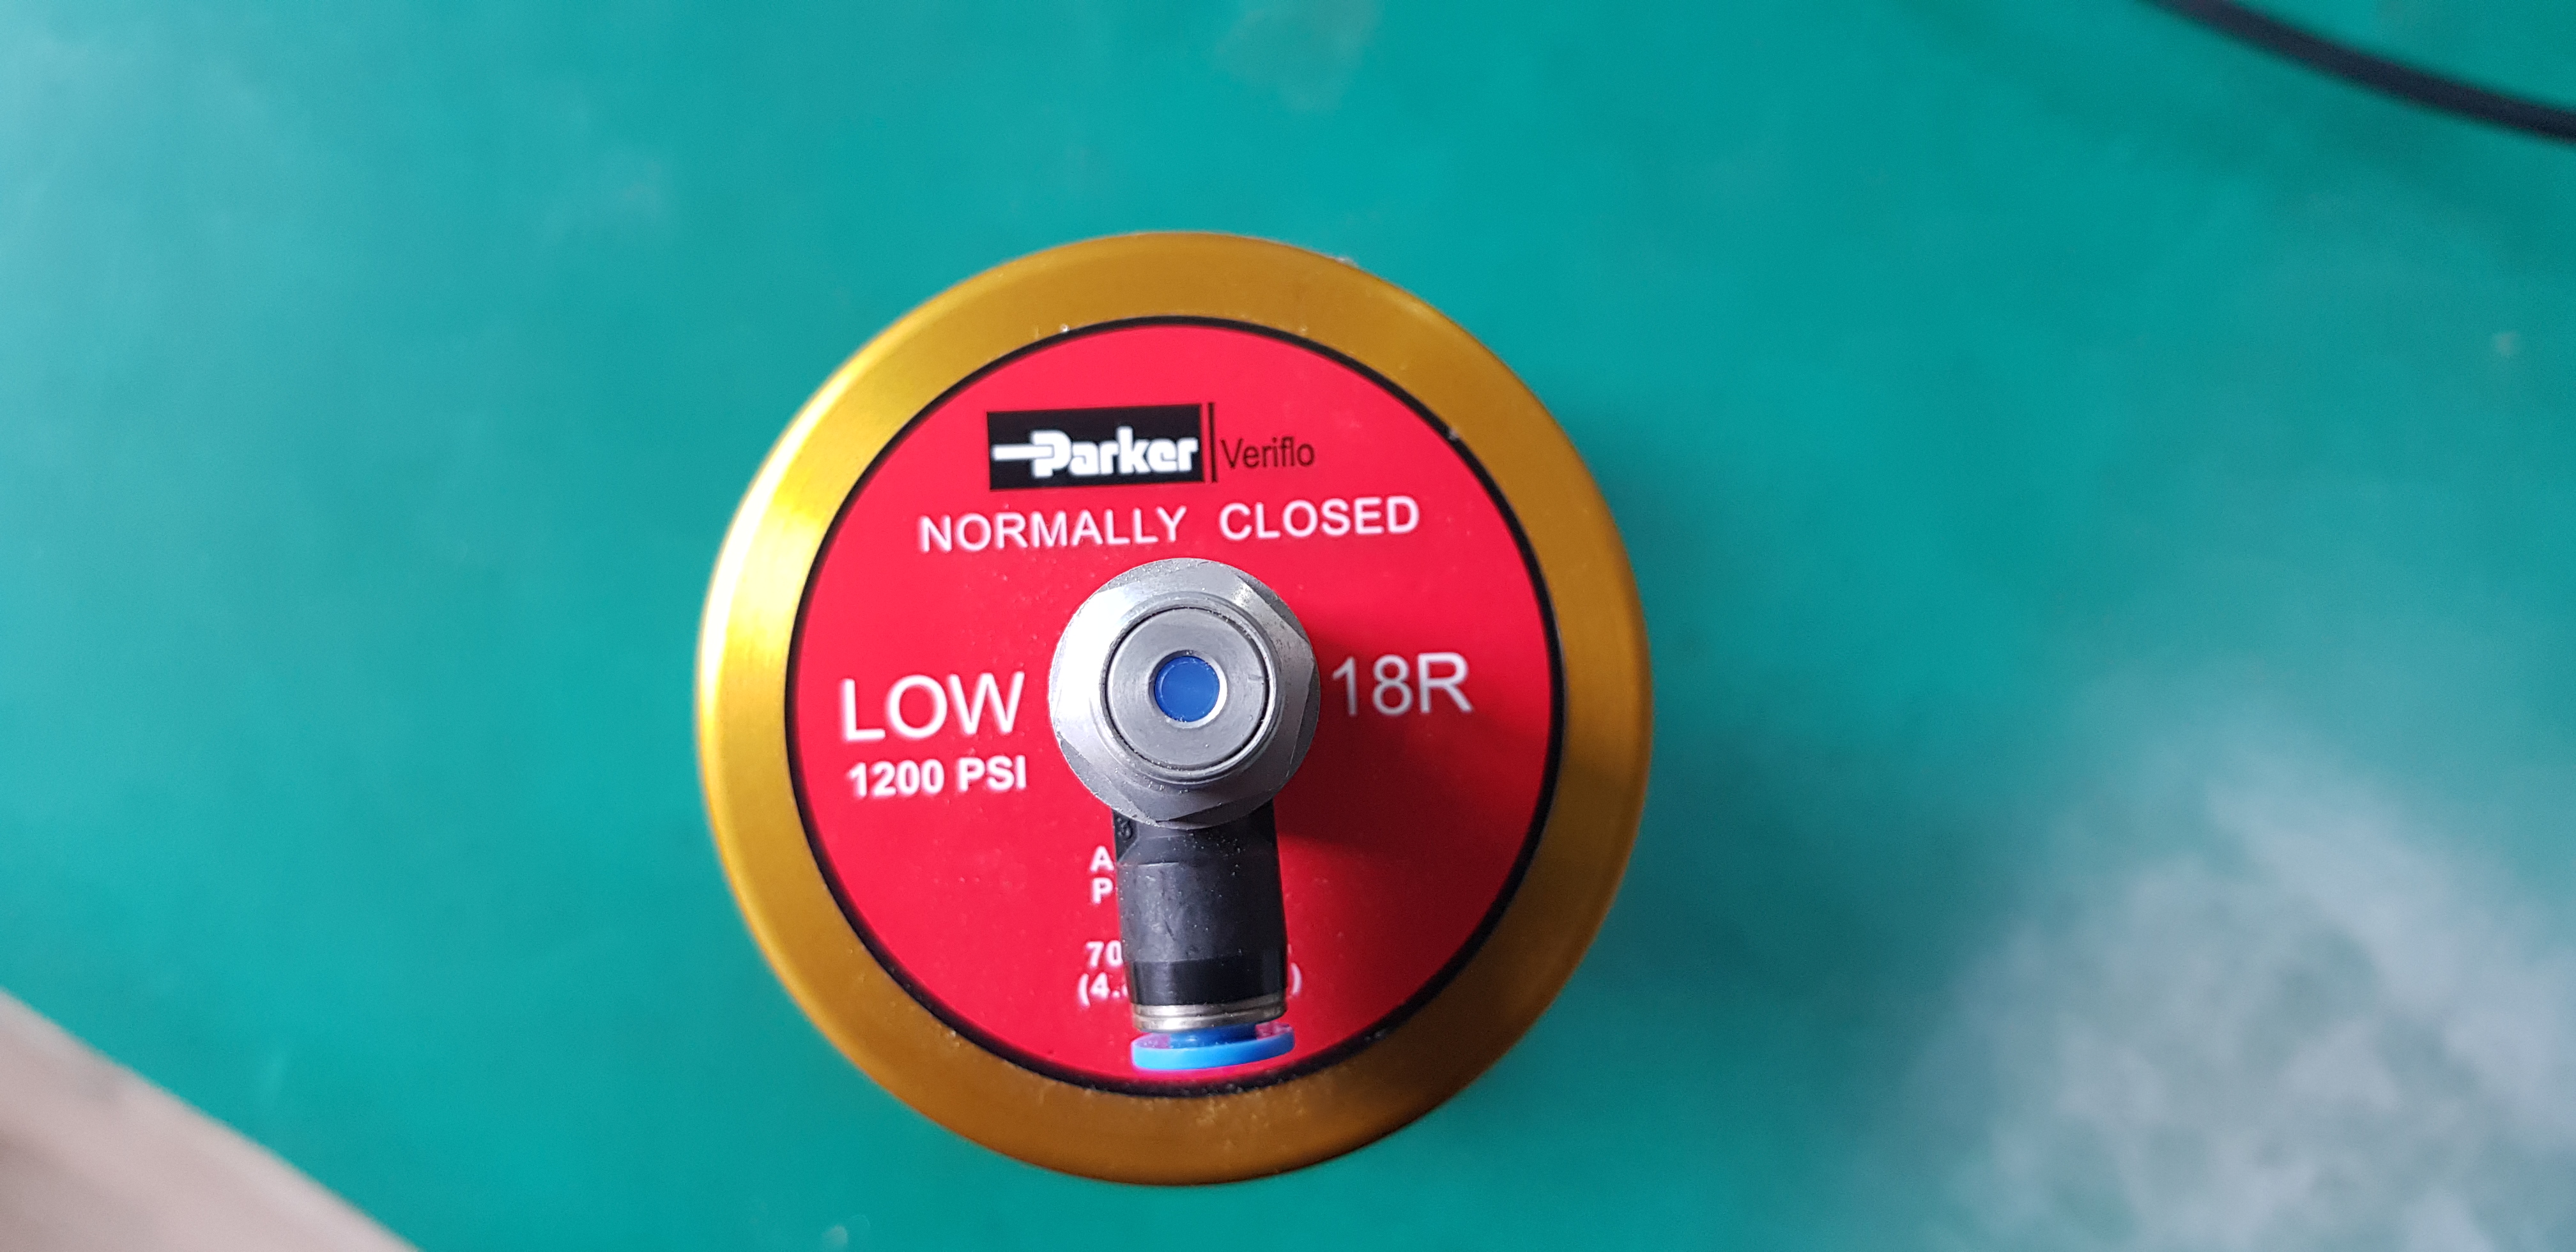 PARKER VERIFLO  NORMALLY CLOSED LOW 1200PSI 18R (중고)